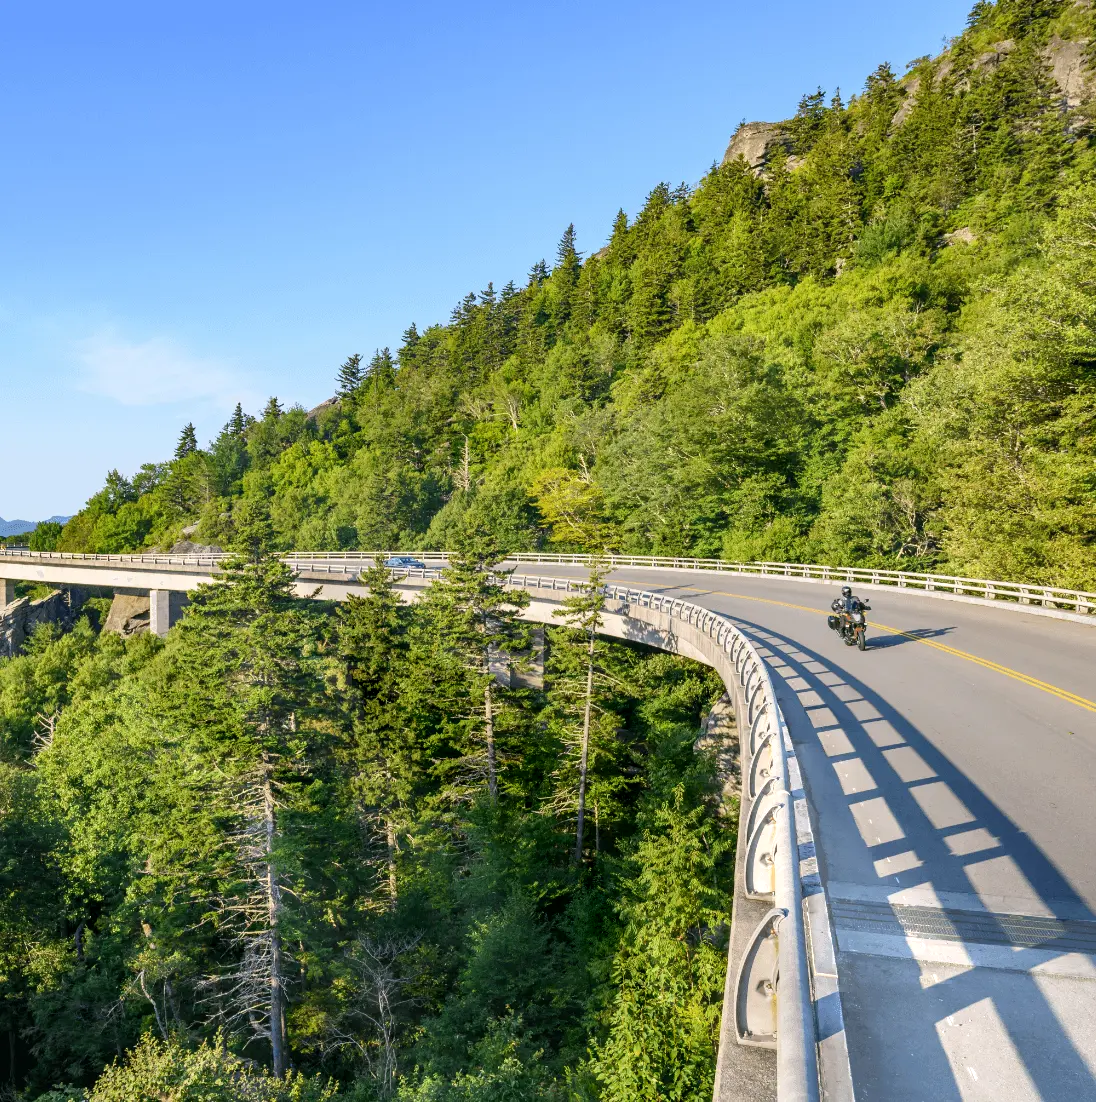 A motorcyclist rides through a winding stretch of the Linn Cove Viaduct on the Blue Ridge Parkway in North Carolina